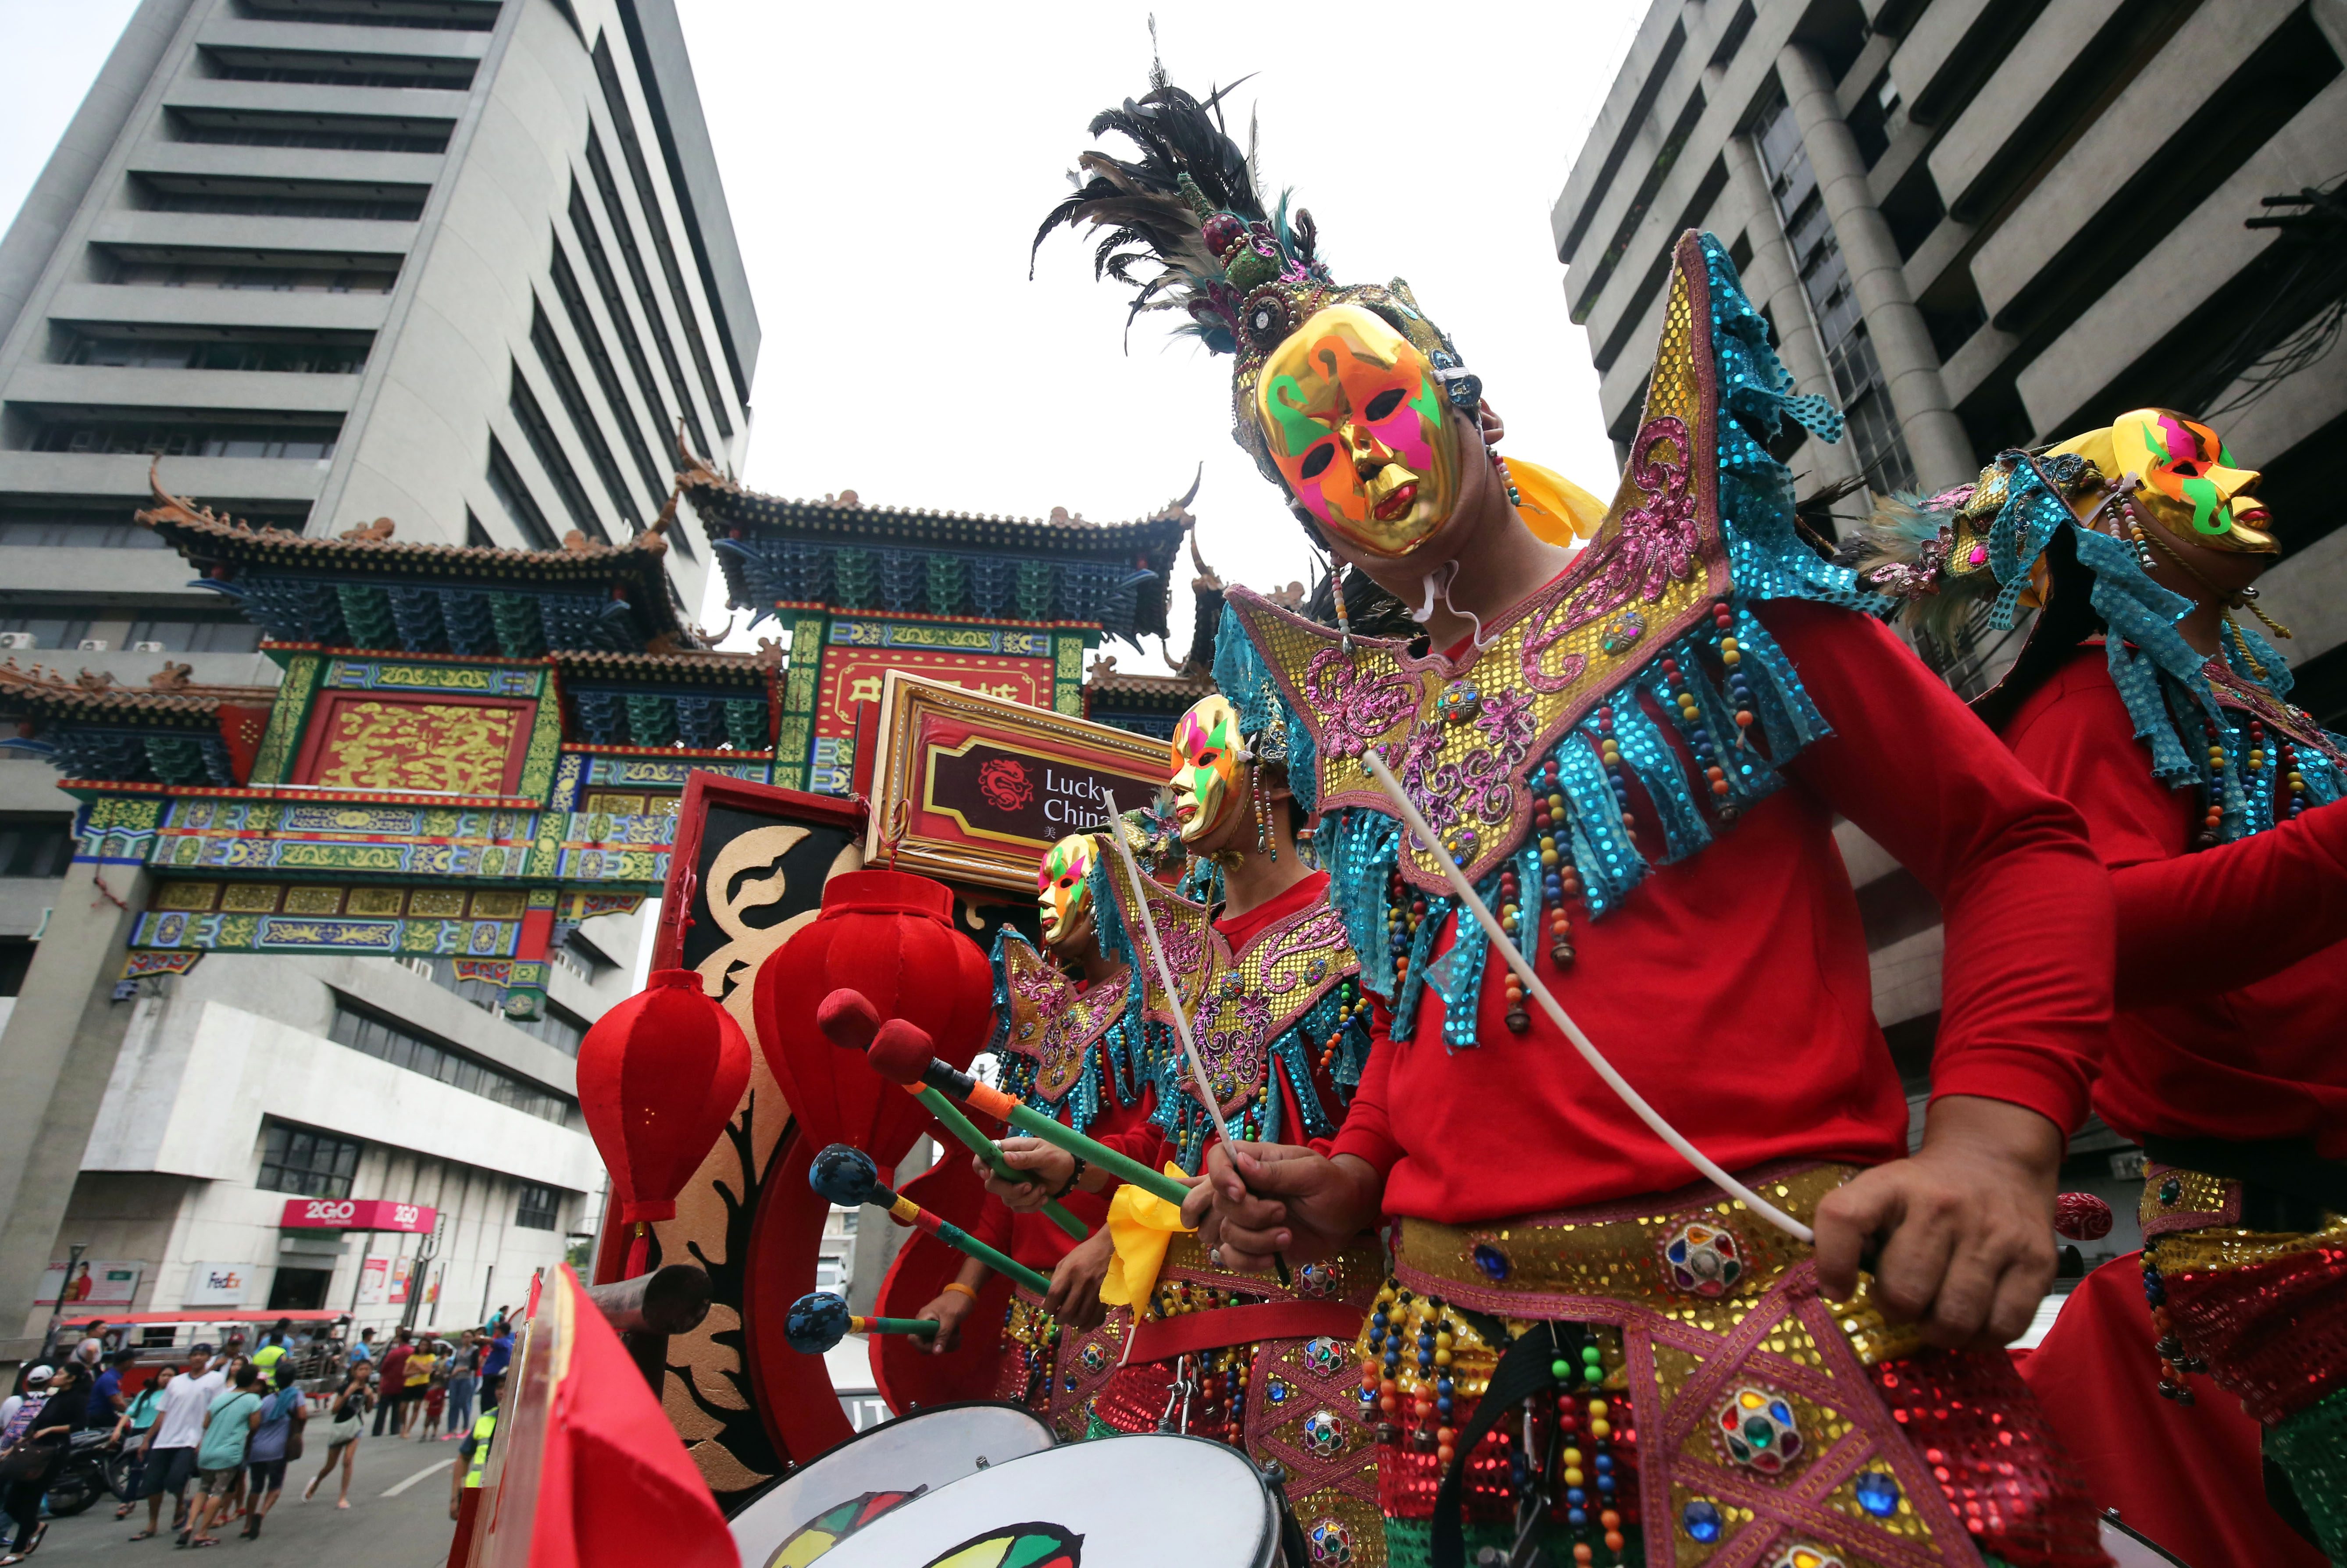 COLORFUL WELCOME. Masked men in colorful gear welcome revelers near the Filipino-Chinese Friendship Arch in Binondo. Photo by Ben Nabong/Rappler    